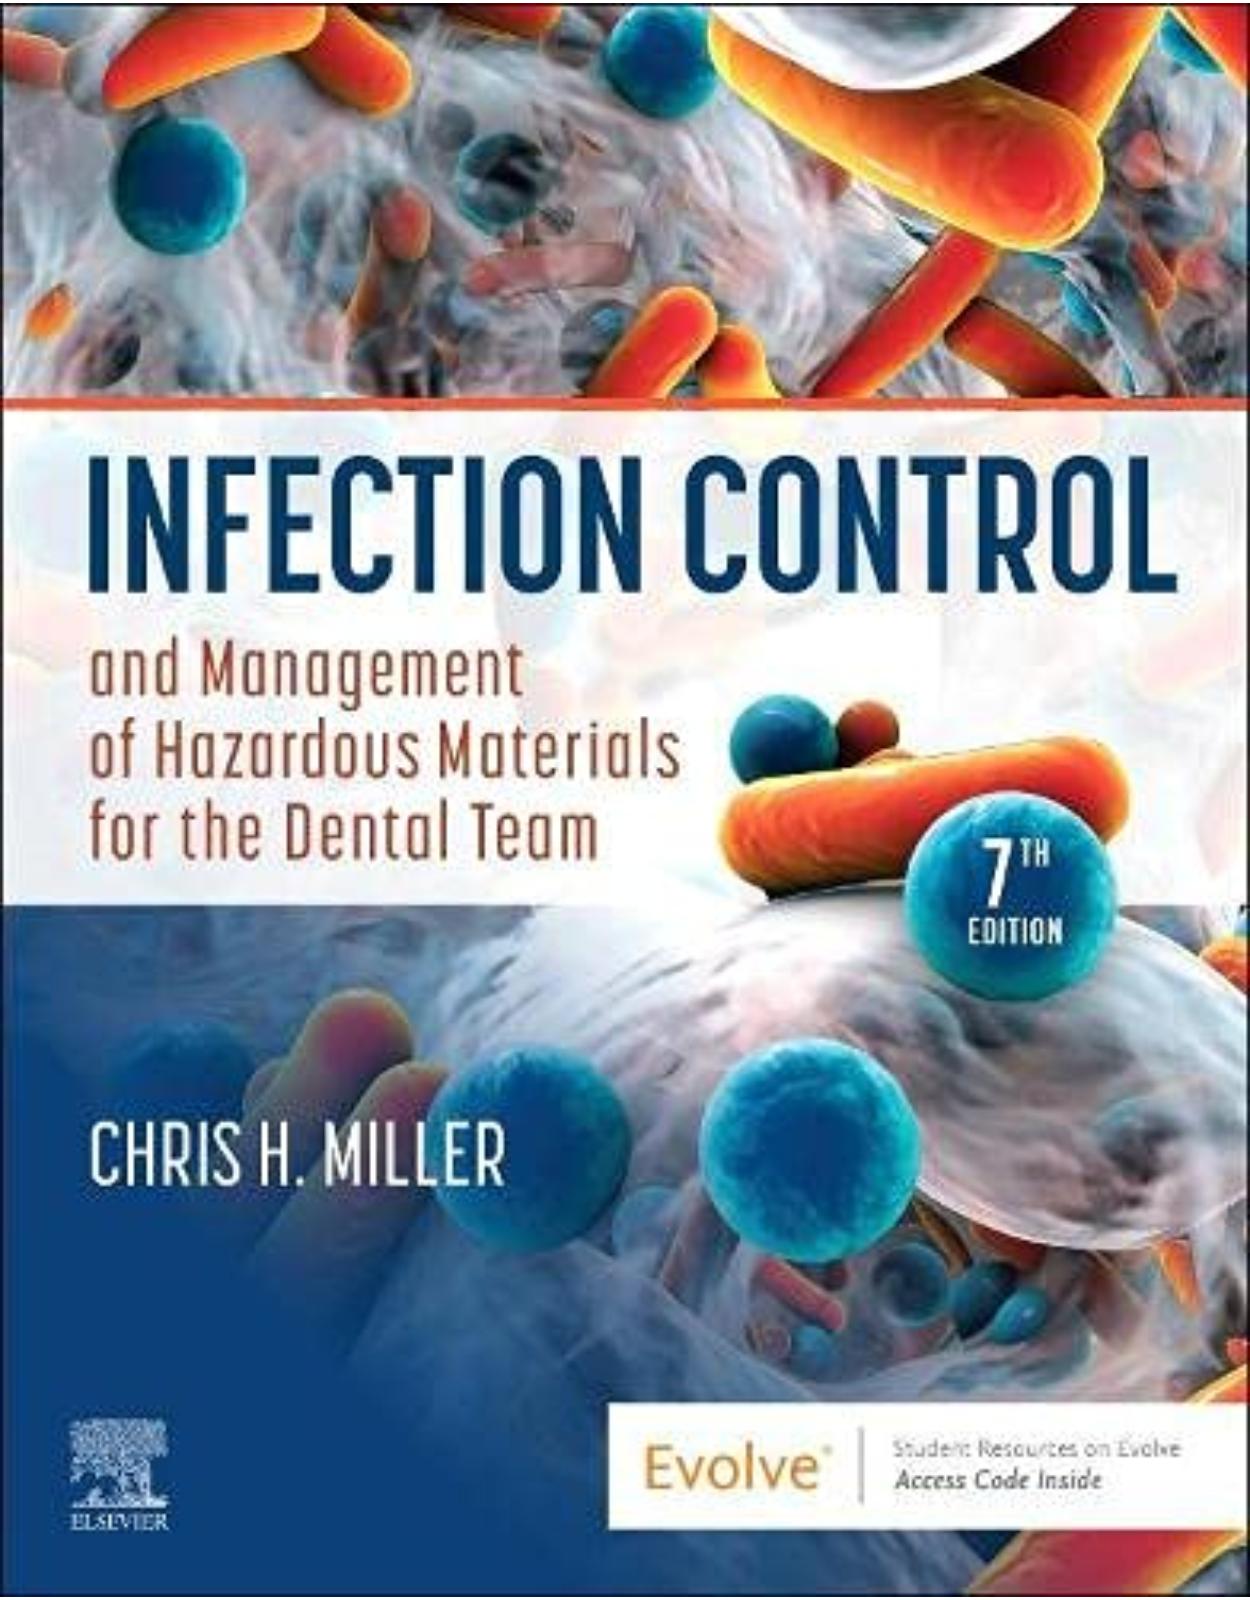 Infection Control and Management of Hazardous Materials for the Dental Team 